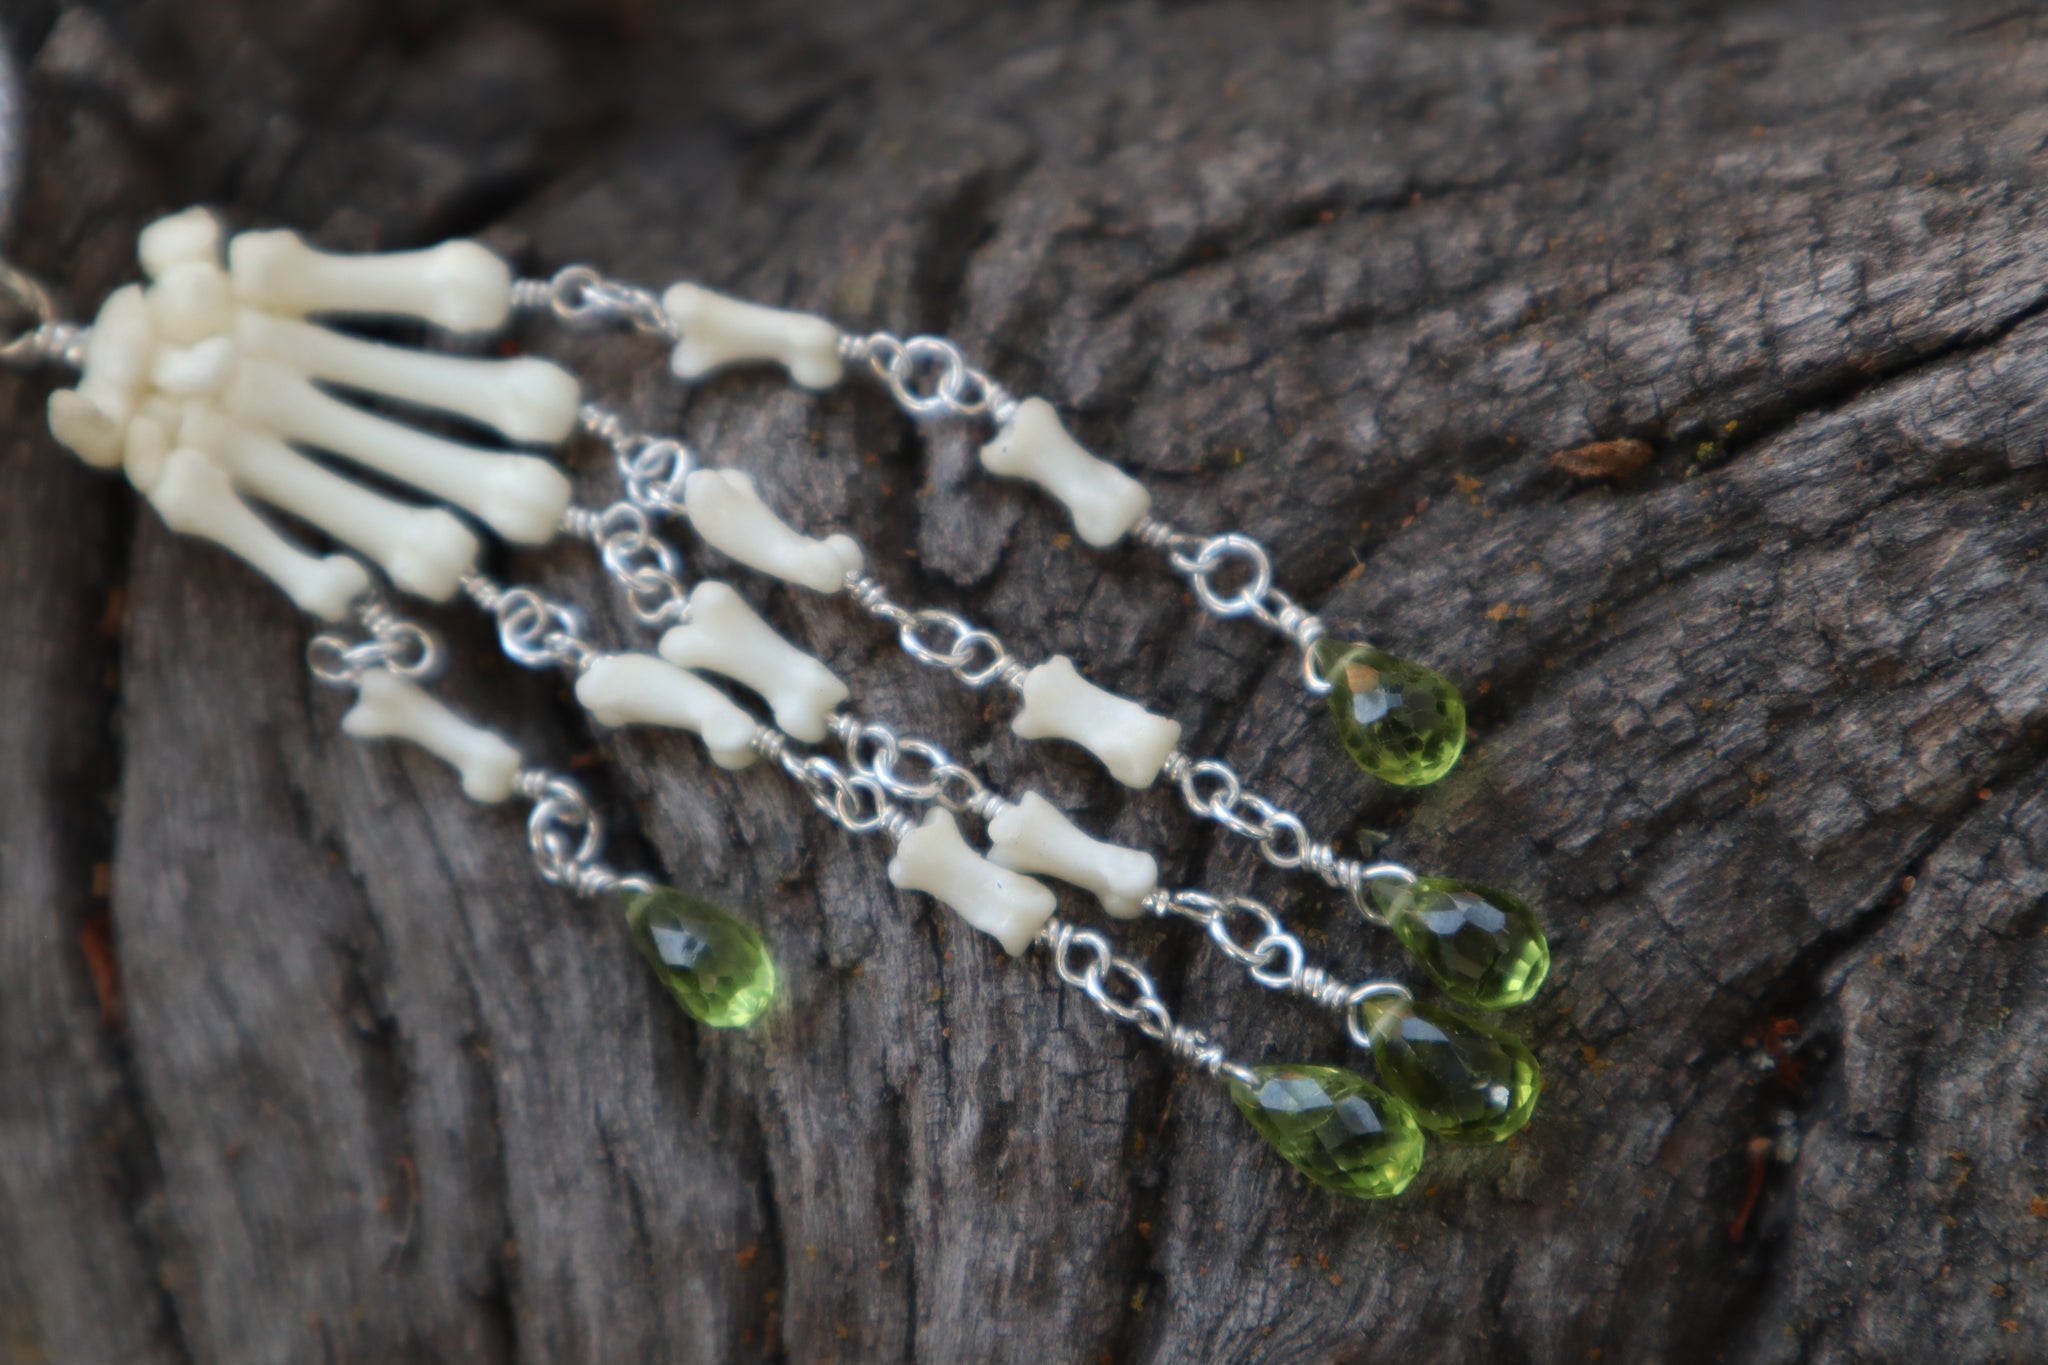 Fluid Striped Skunk Paw Articulation with Peridot “Claws”